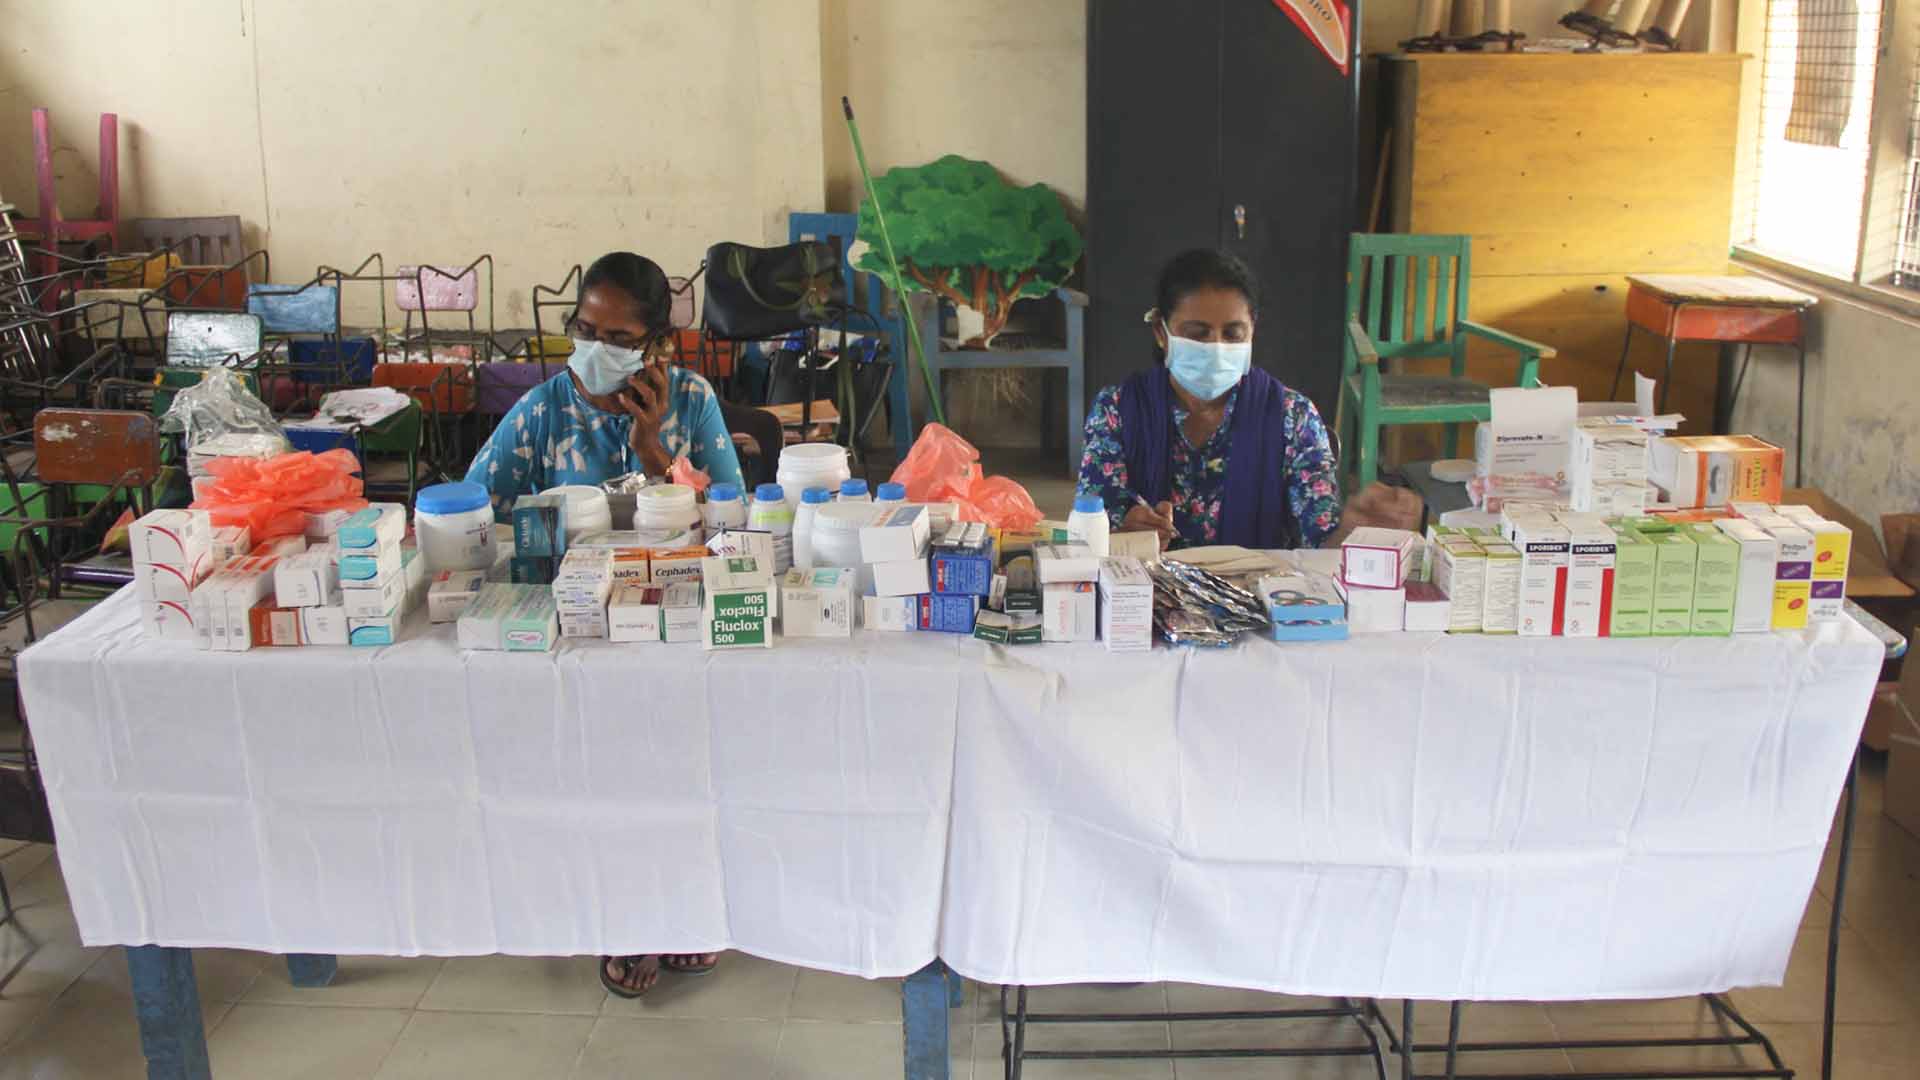 The picture shows a table covered with a white cloth. The table has many boxes of medicine. Two women wearing surgical masks sit behind the table.